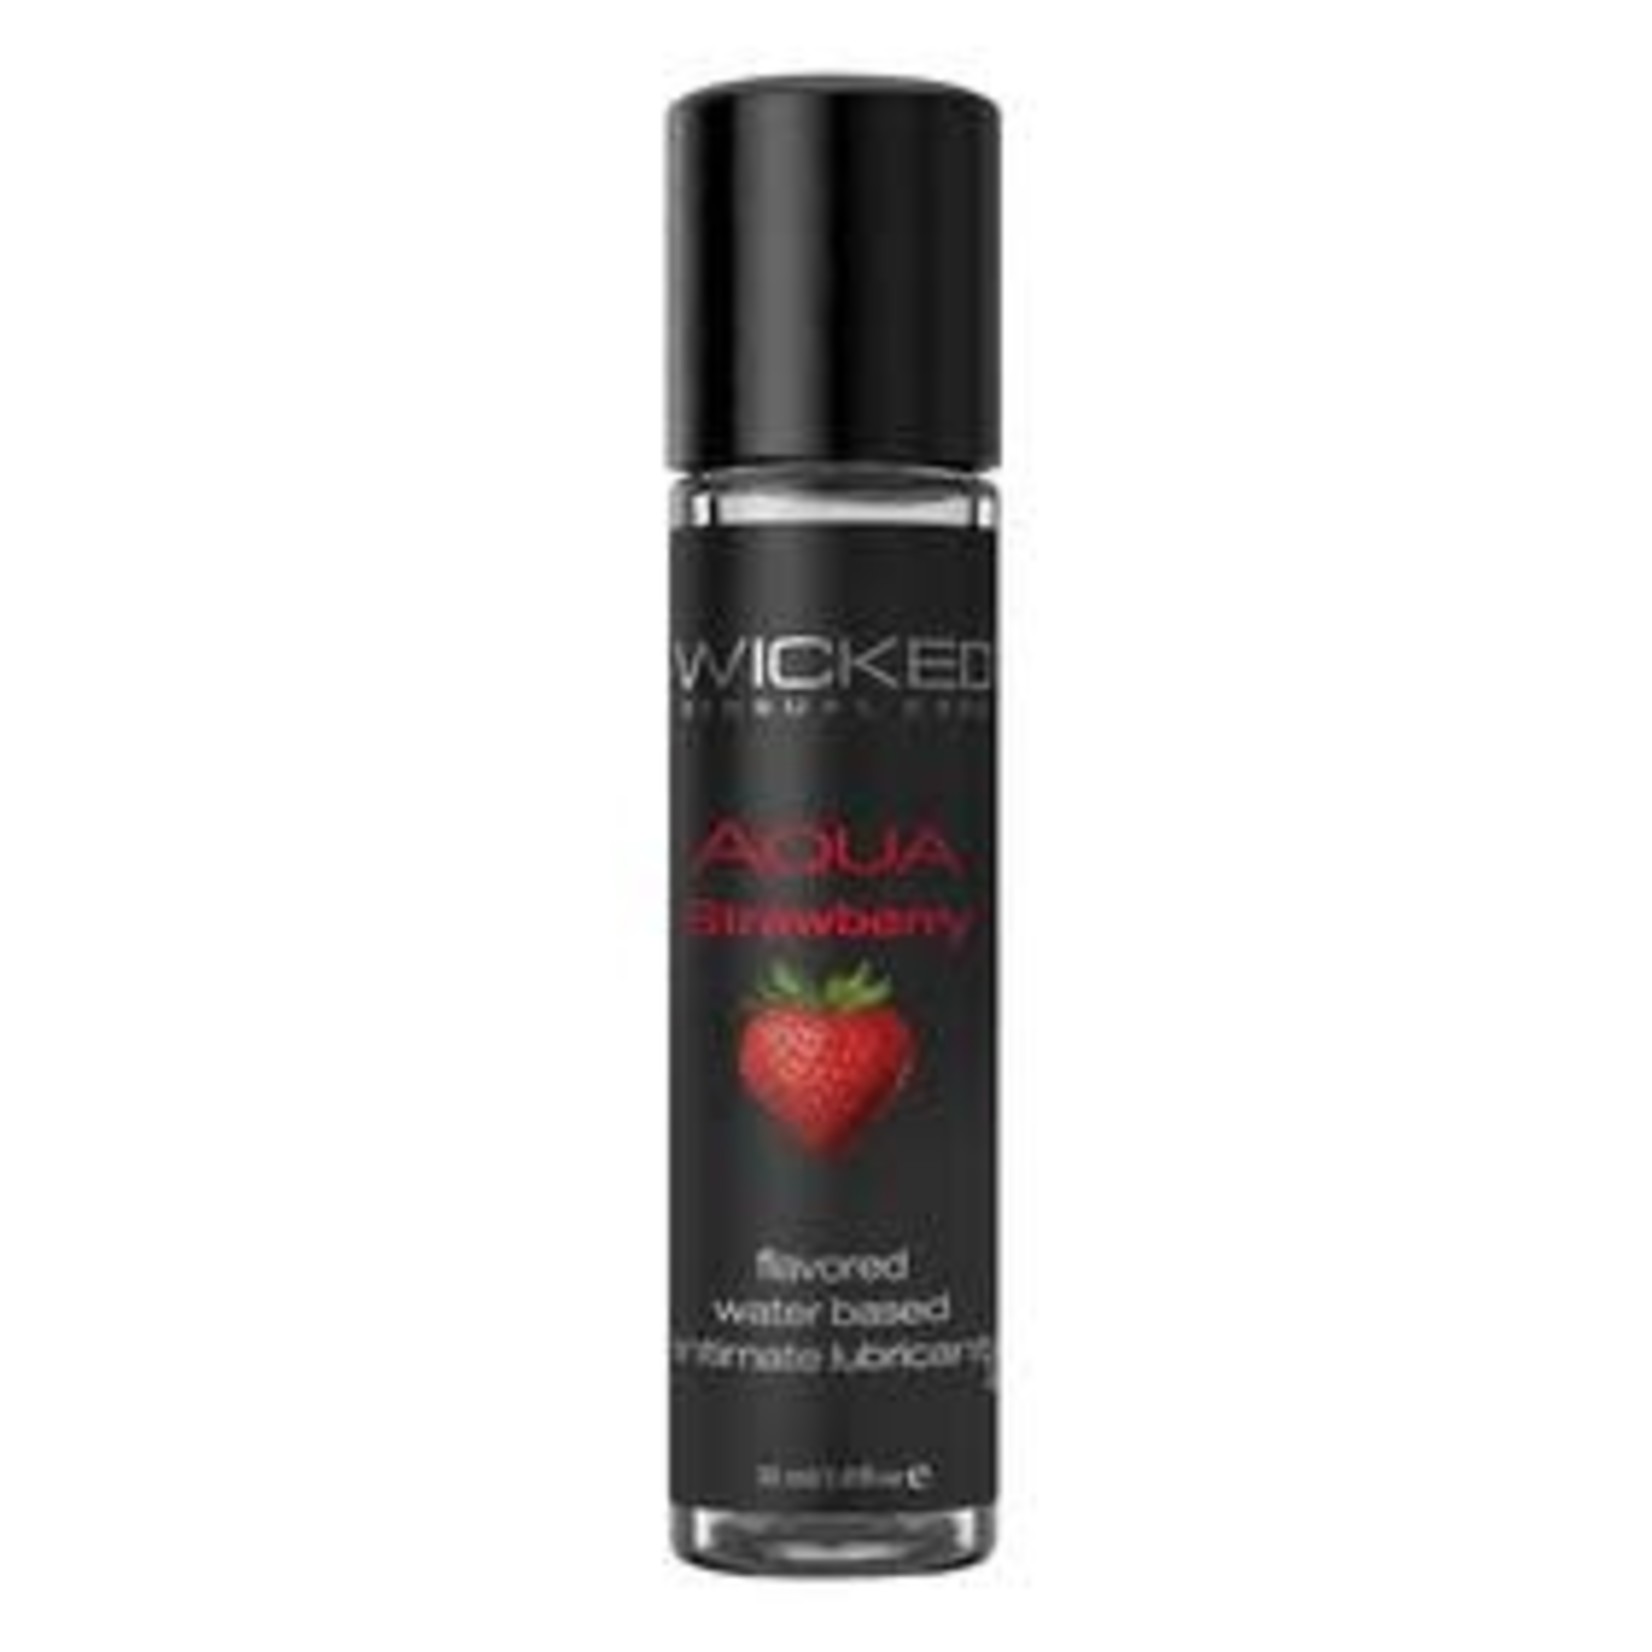 Wicked Aqua Water Based Flavored Lubricant Strawberry 1oz